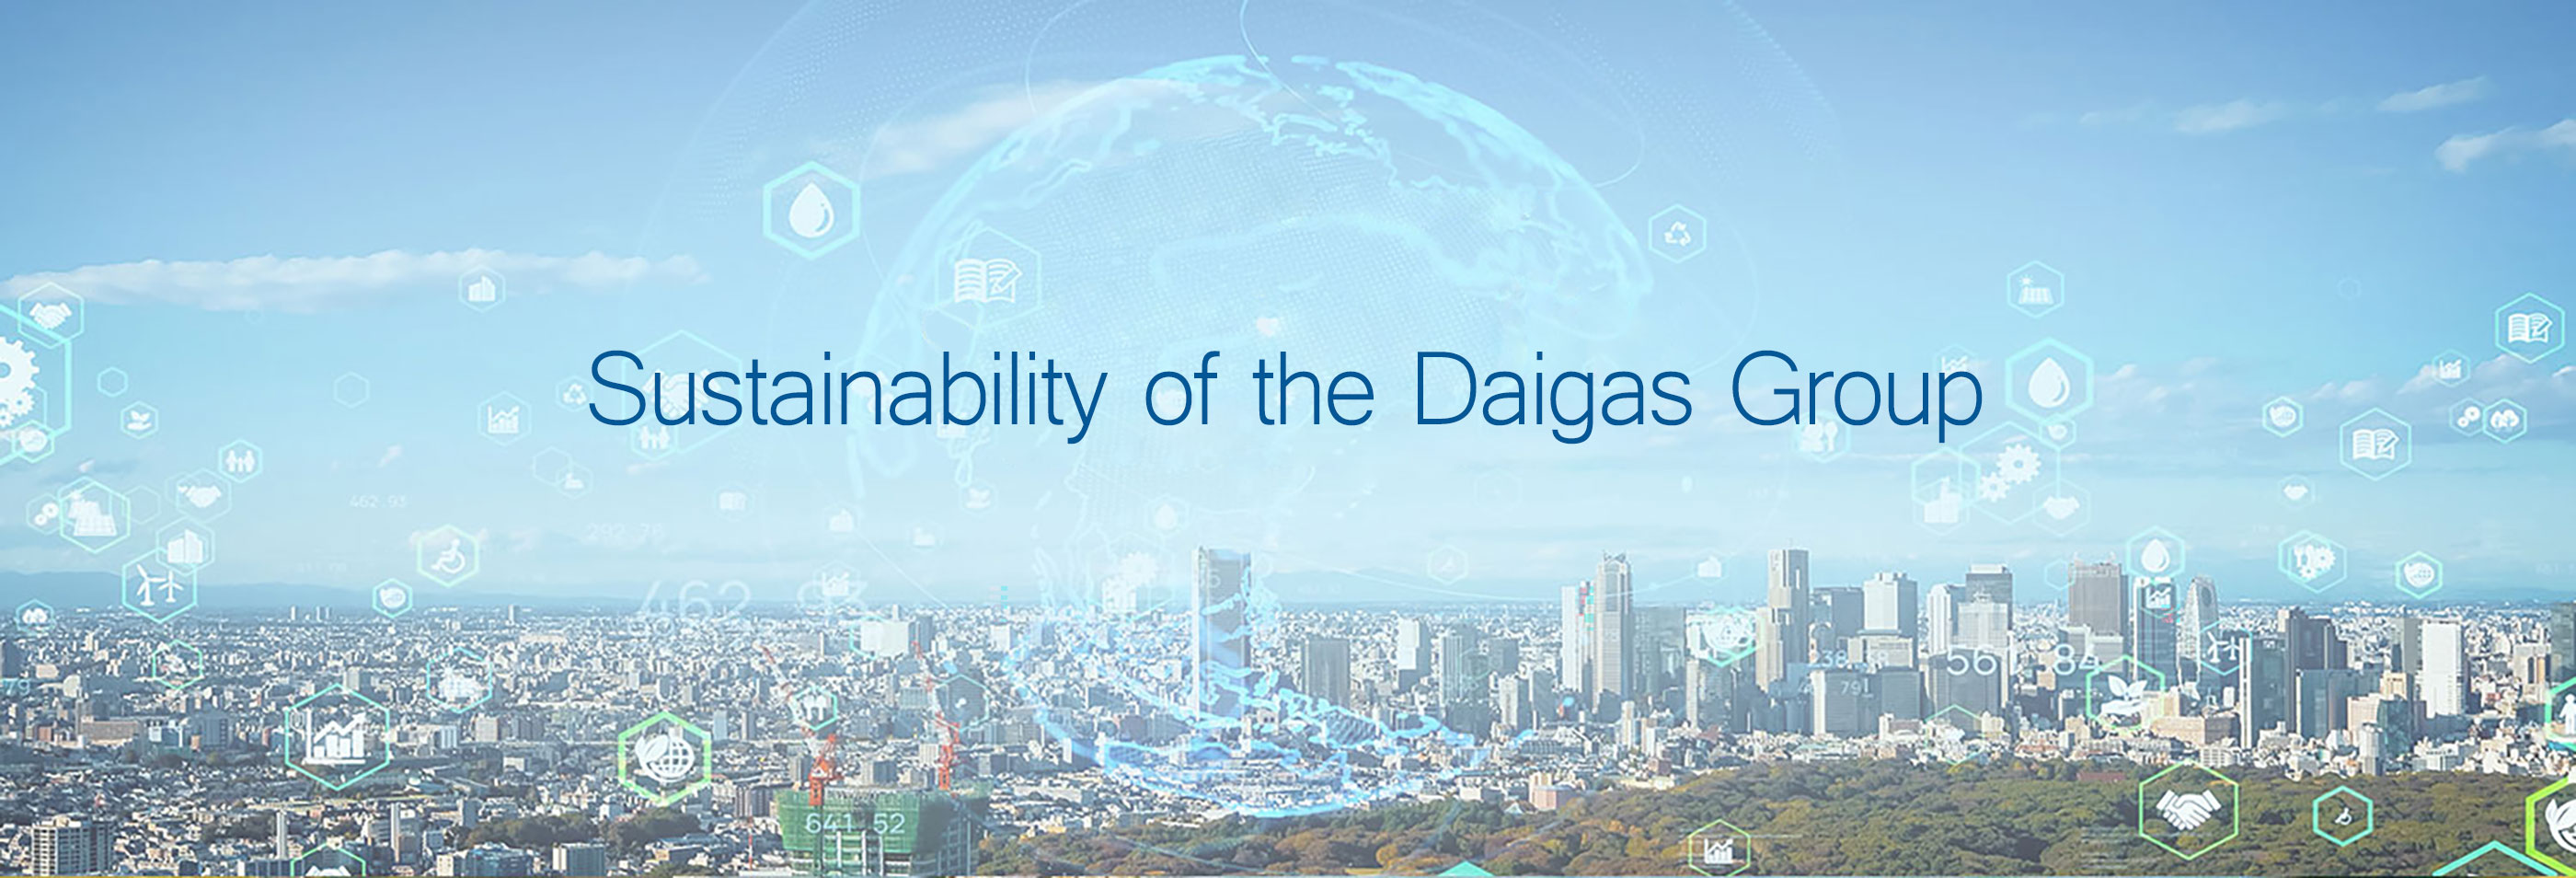 Sustainability of the Daigas Group